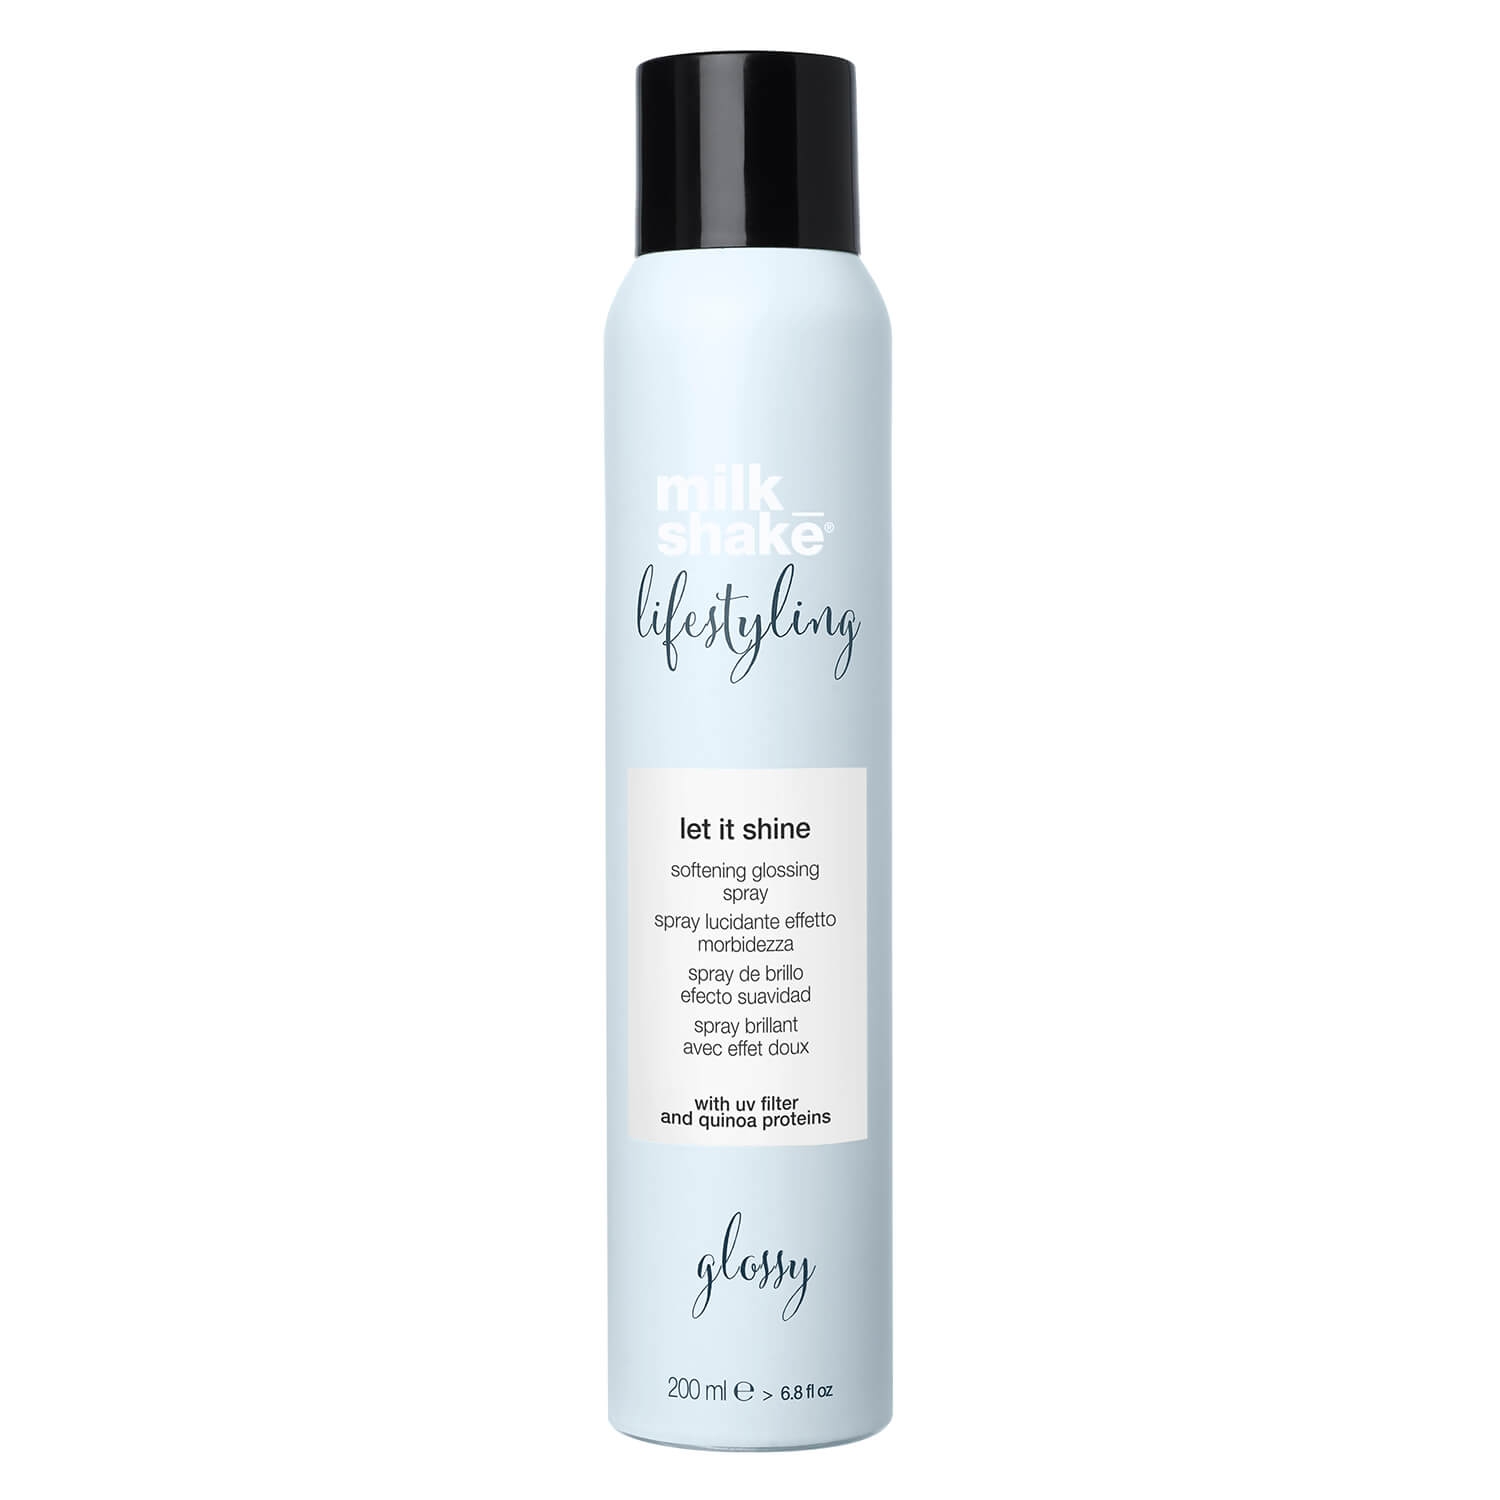 Product image from milk_shake lifestyling - let it shine softening glossing spray